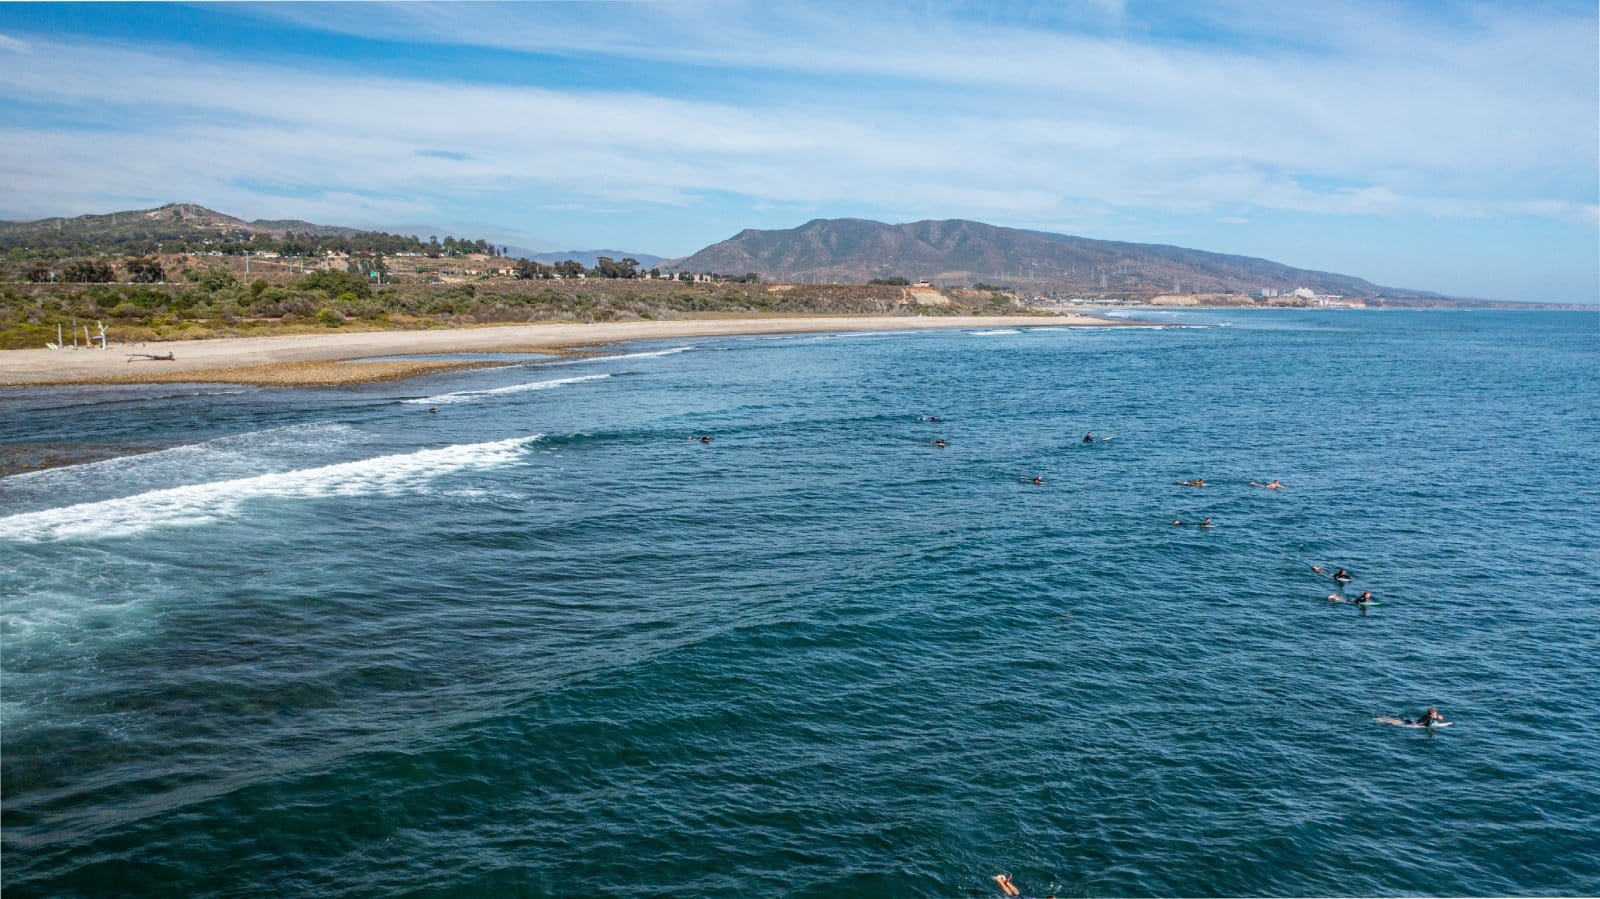 <p class="wp-caption-text">Image Credit: Shutterstock / tomtomdotcom</p>  <p>Catch some California dreamin’ at Trestles, one of SoCal’s most iconic surf spots. Known for its flawless waves and laid-back vibes, this epic stretch of coastline is a favorite among pros and amateurs alike. Whether you’re throwing down airs or hanging ten, Trestles offers something for every level of shredder.</p>